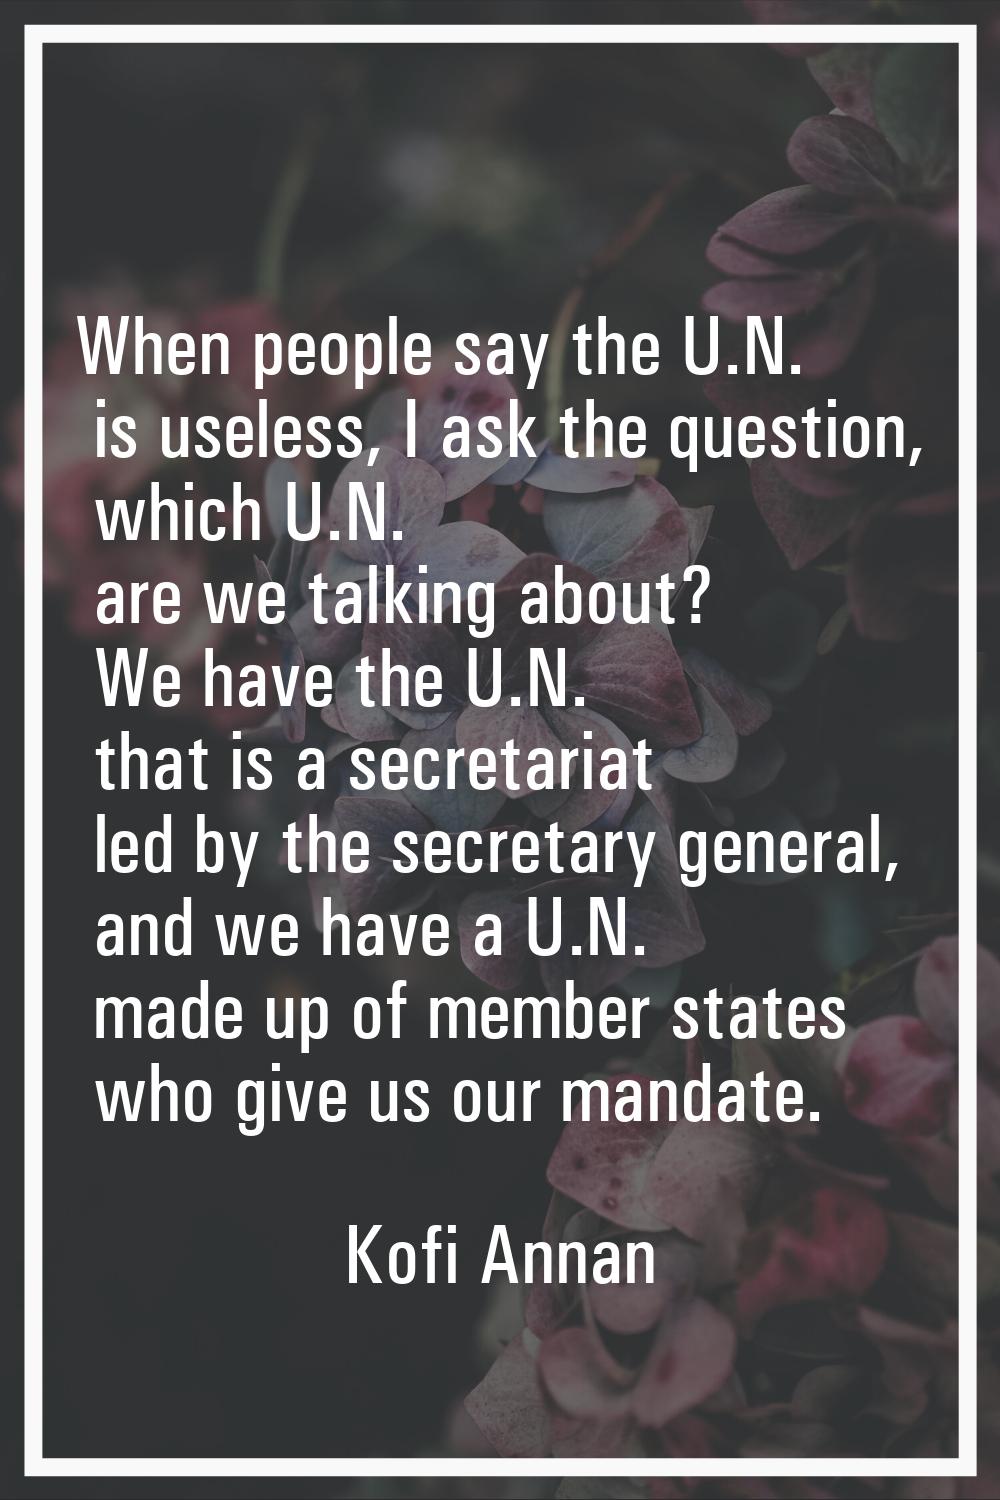 When people say the U.N. is useless, I ask the question, which U.N. are we talking about? We have t